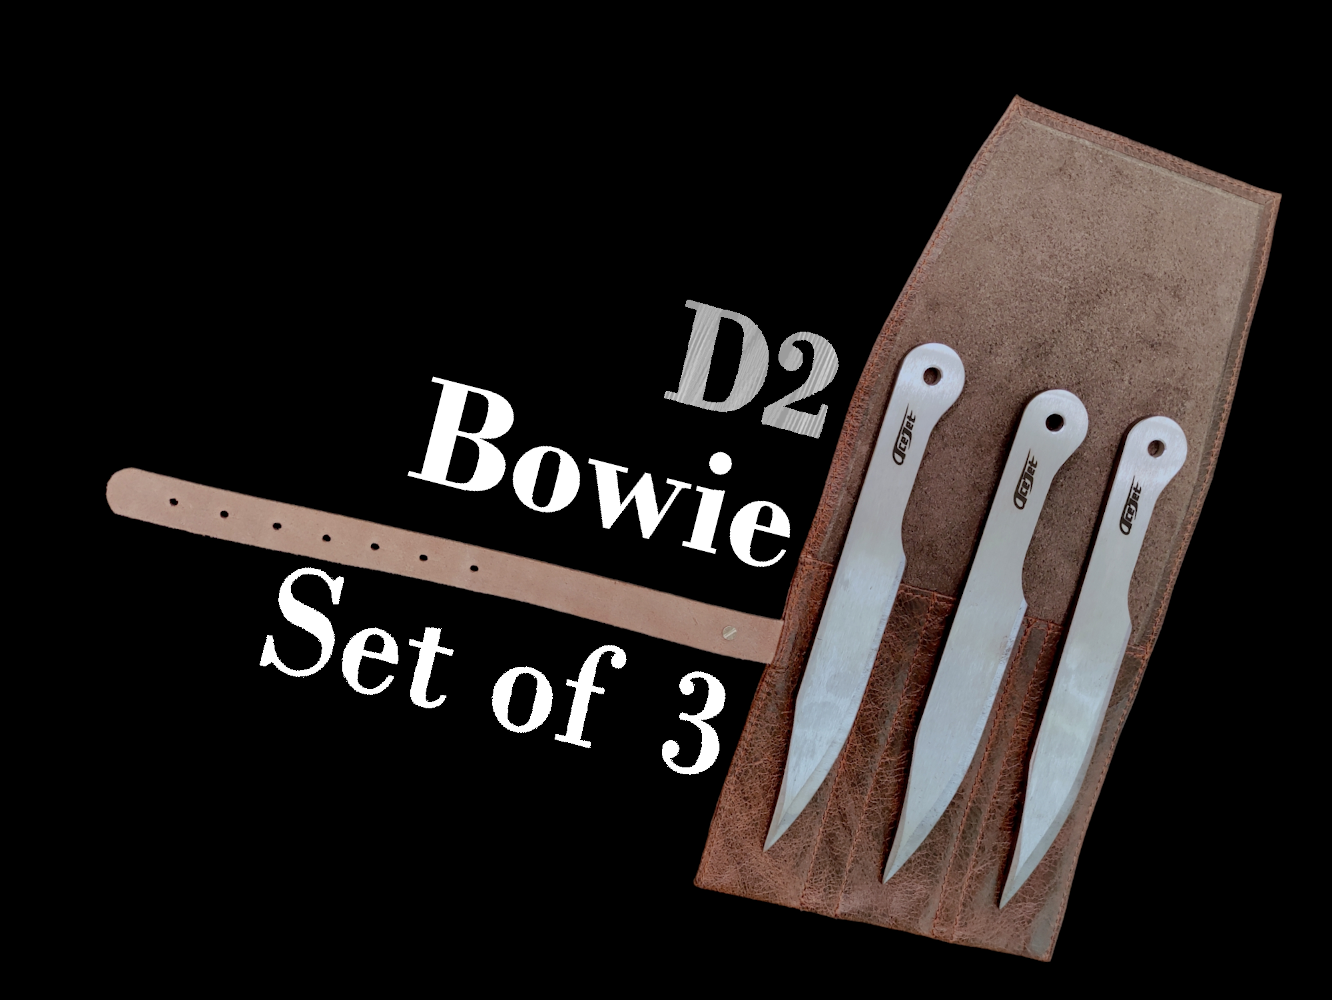 Bowie D2 10" - Throwing Knife Set of 3